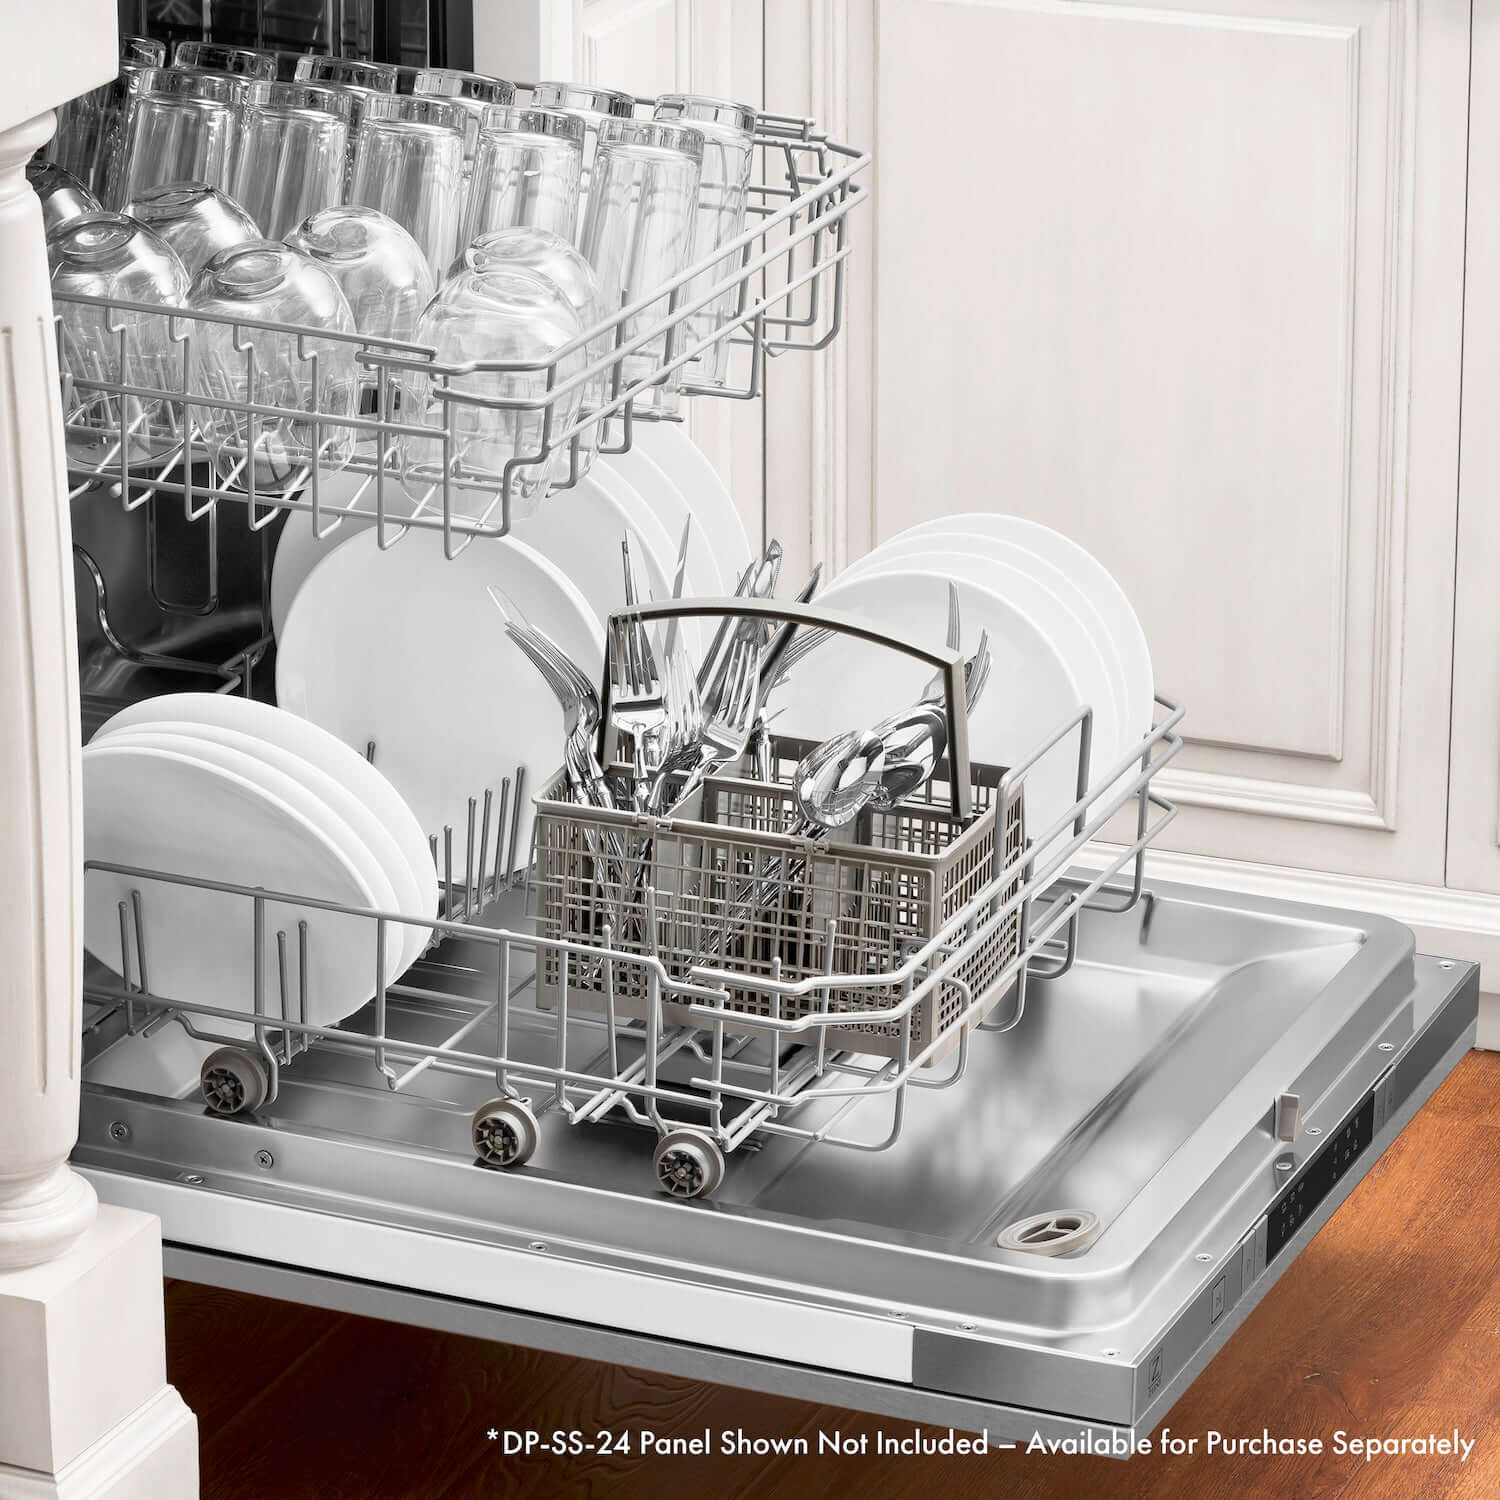 ZLINE 24 in. Panel Ready Top Control Built-In Dishwasher with Stainless Steel Tub, 52dBa (DW7713-24) built-in to cabinets in a luxury kitchen.